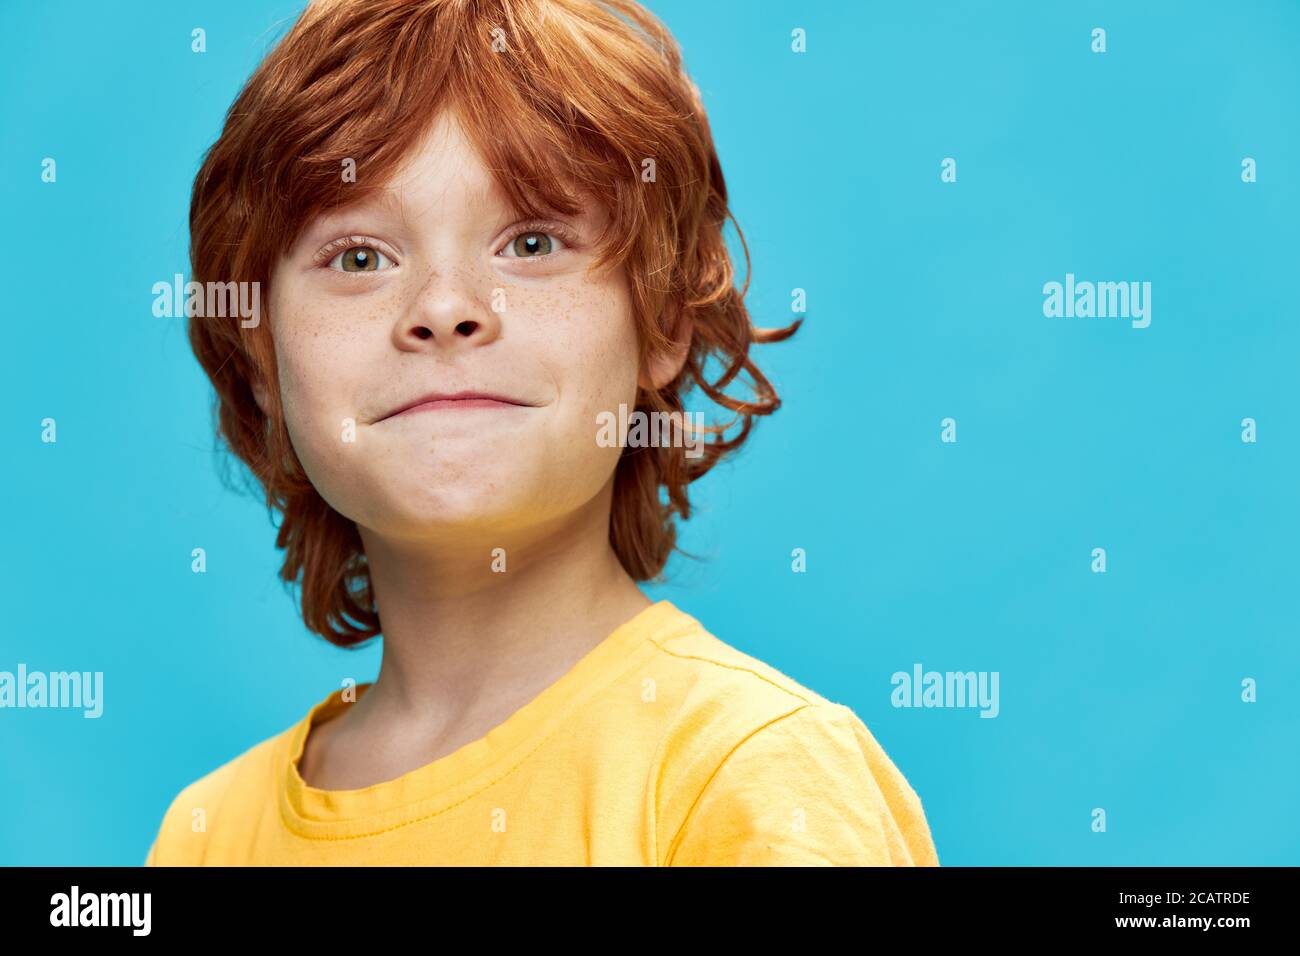 Red and blonde haired boy with freckles - wide 8